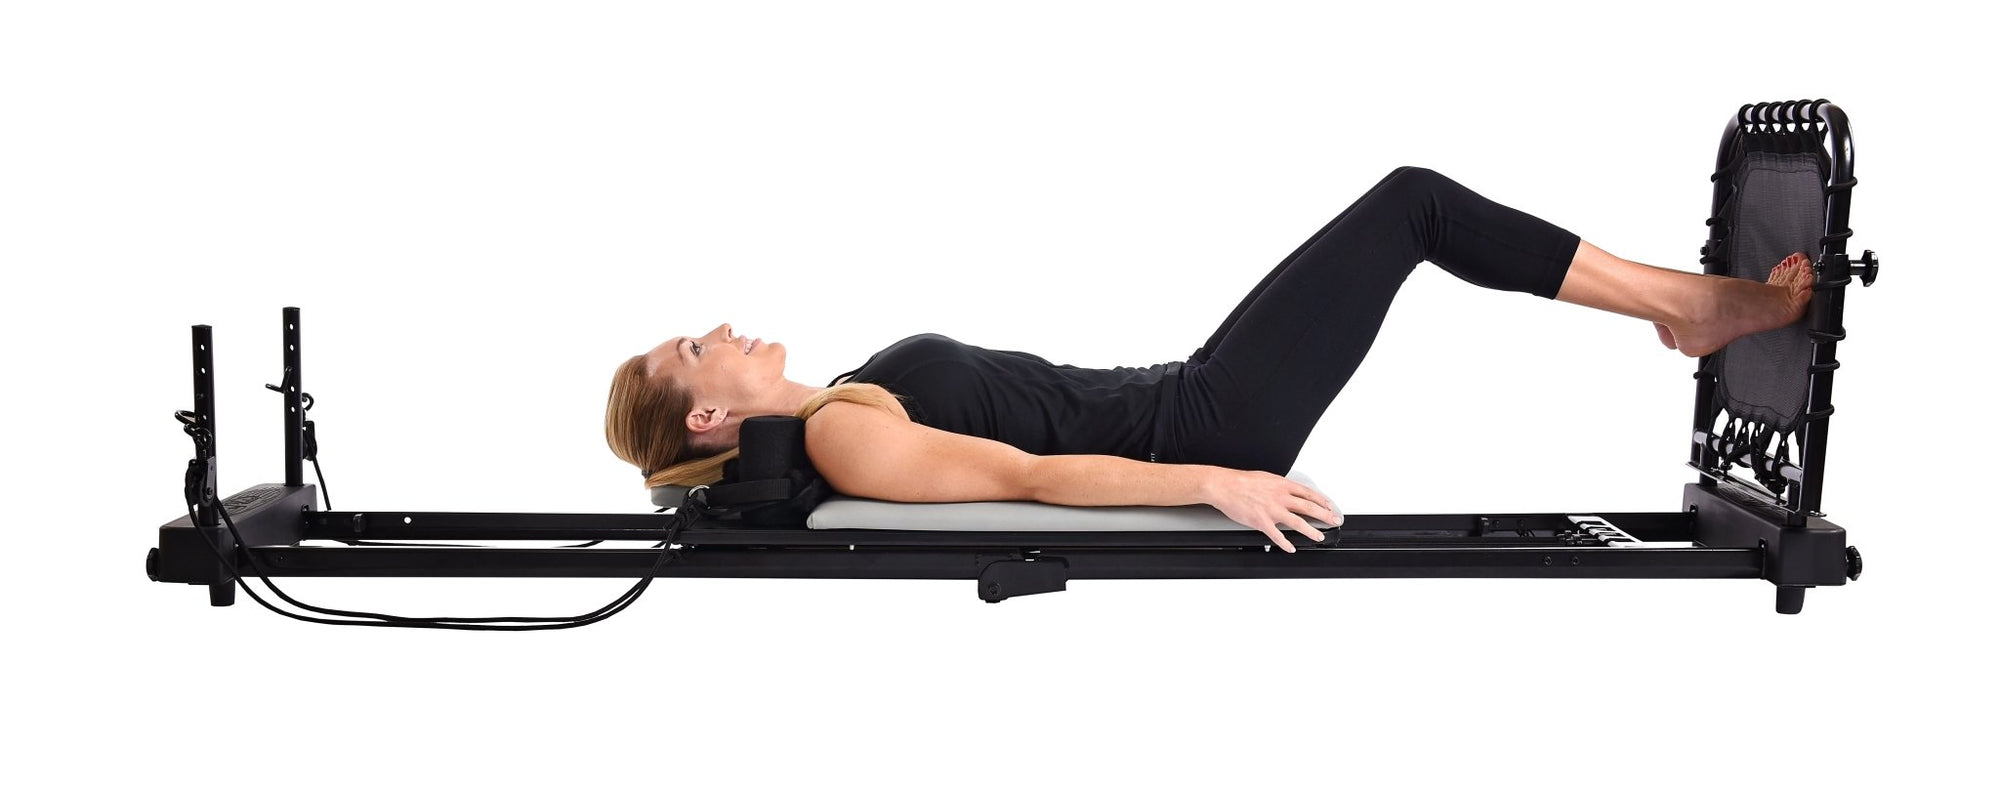 Is it time to upgrade your old Reformer for the new revolutionary Aeropilates Reformer? - AeroPilates